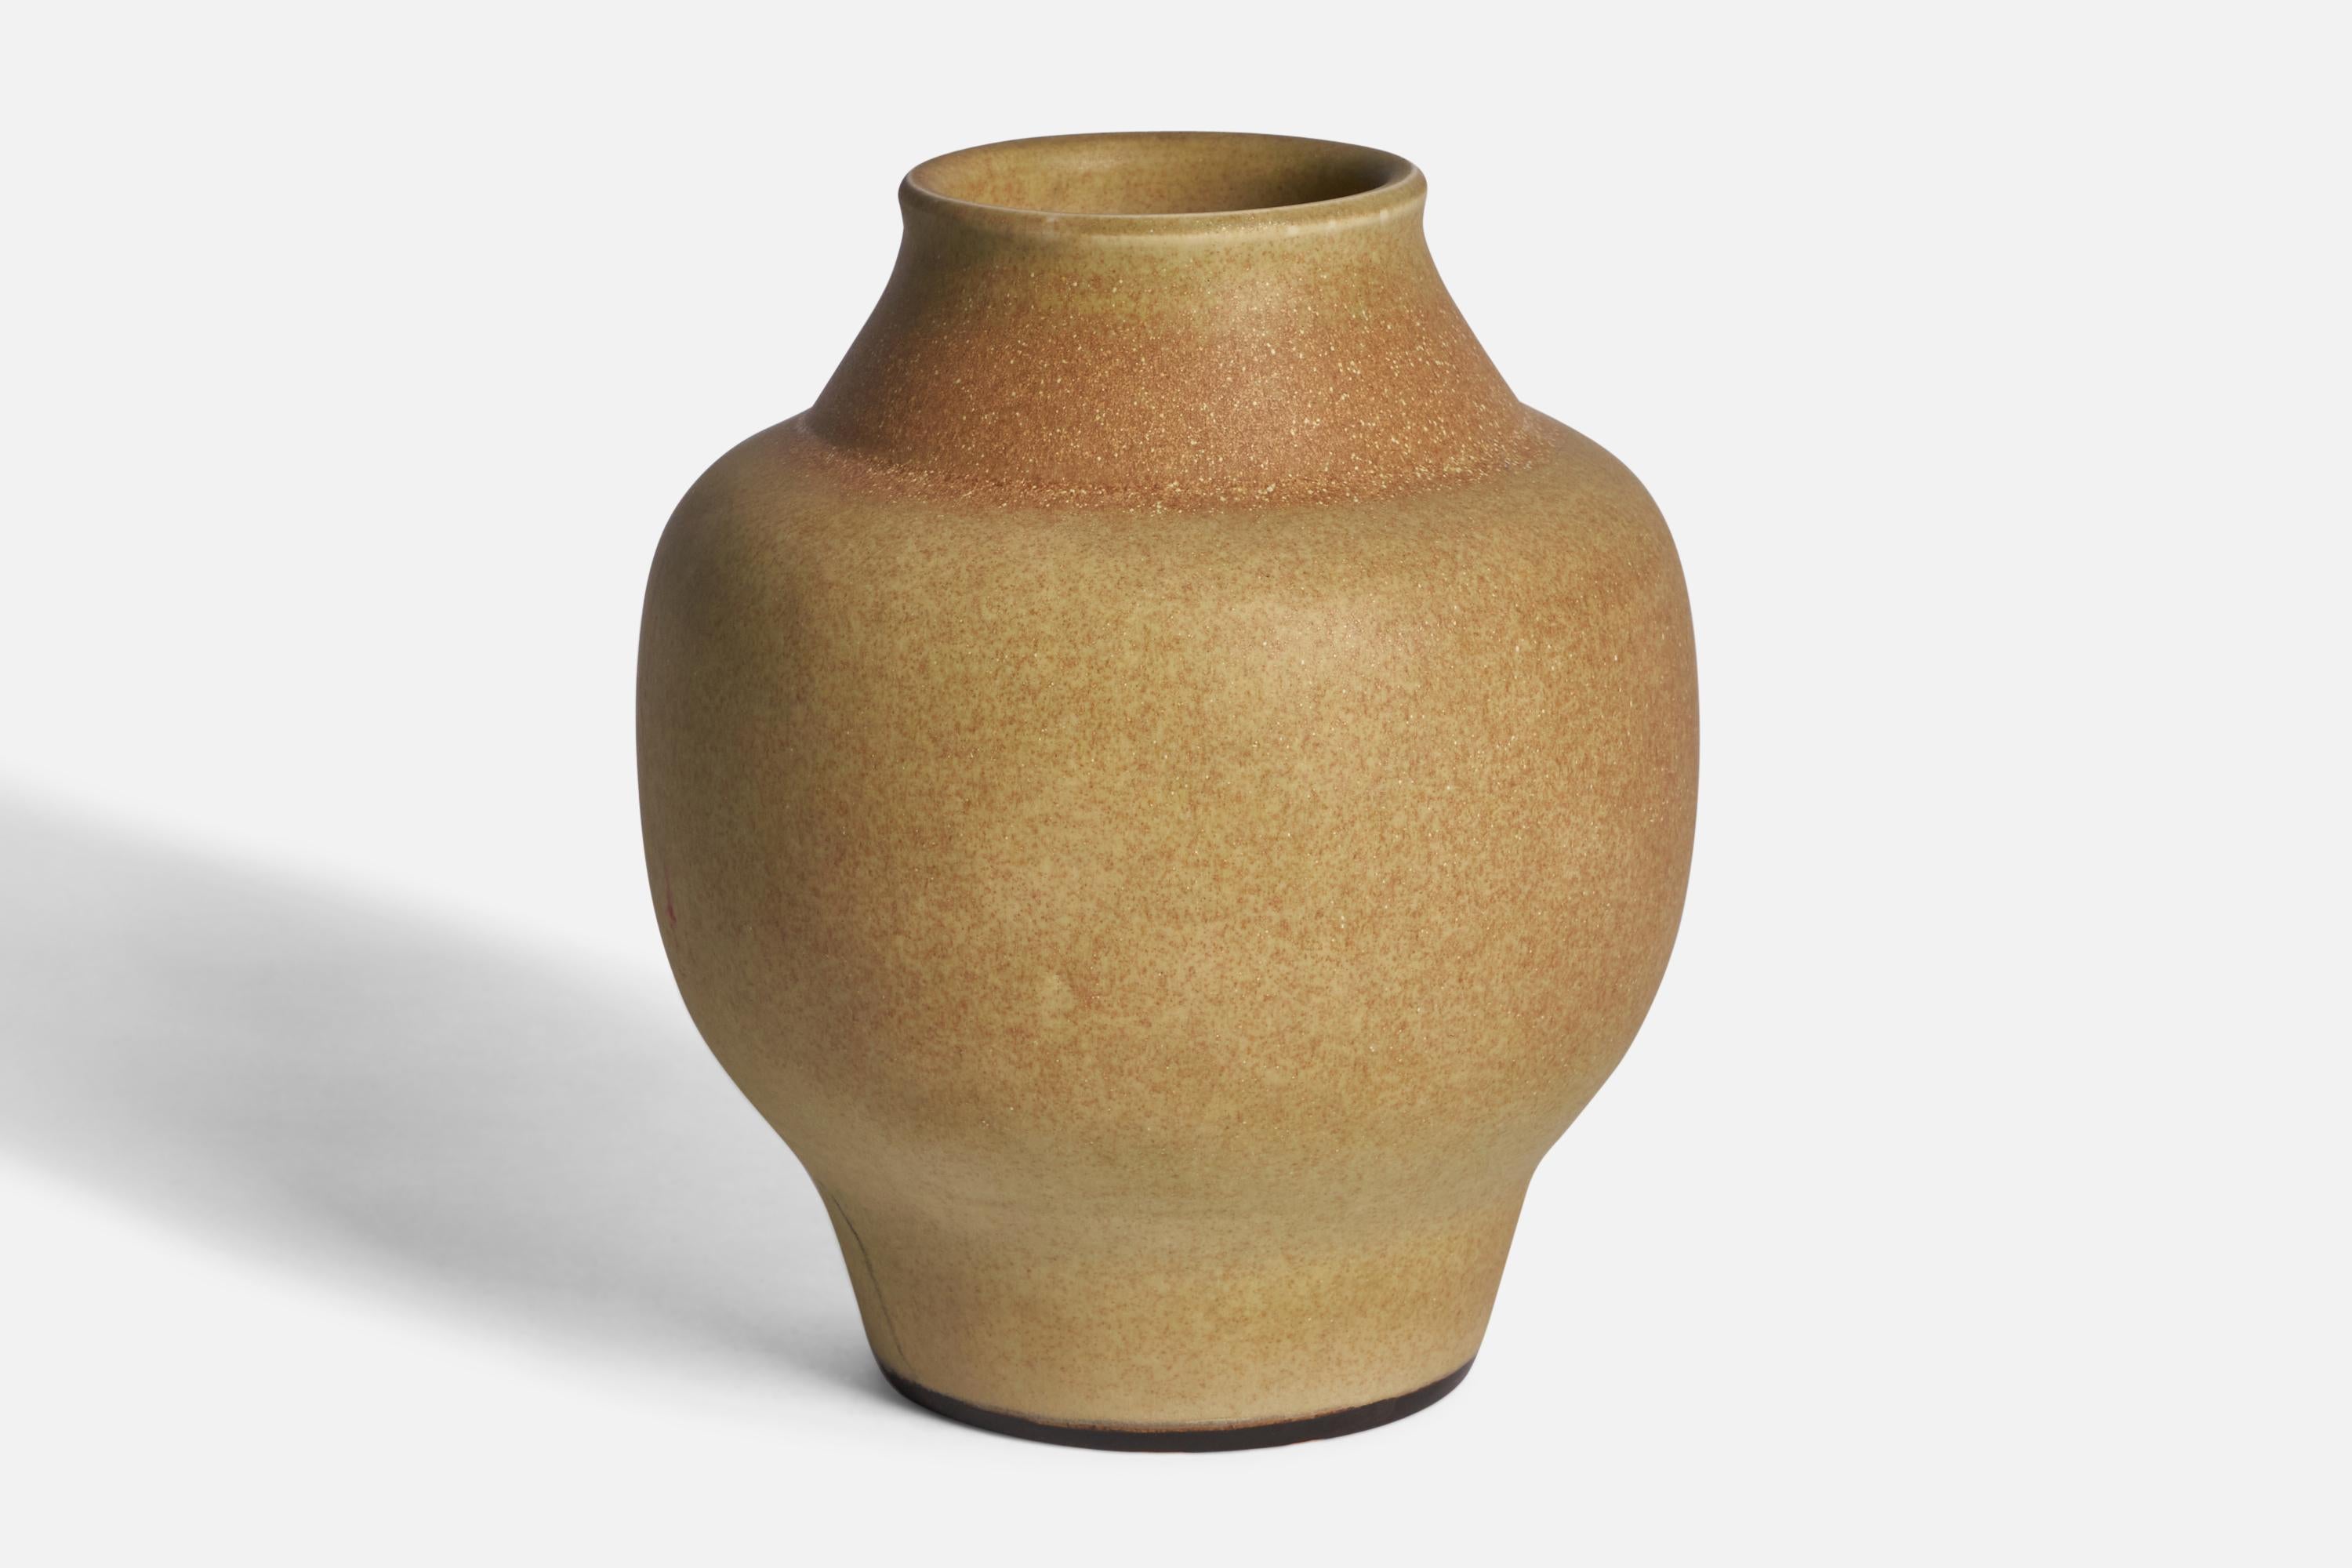 A sizeable matte yellow-glazed stoneware vase designed and produced by Rolf Palm, Mölle, Sweden, c. 1960s.